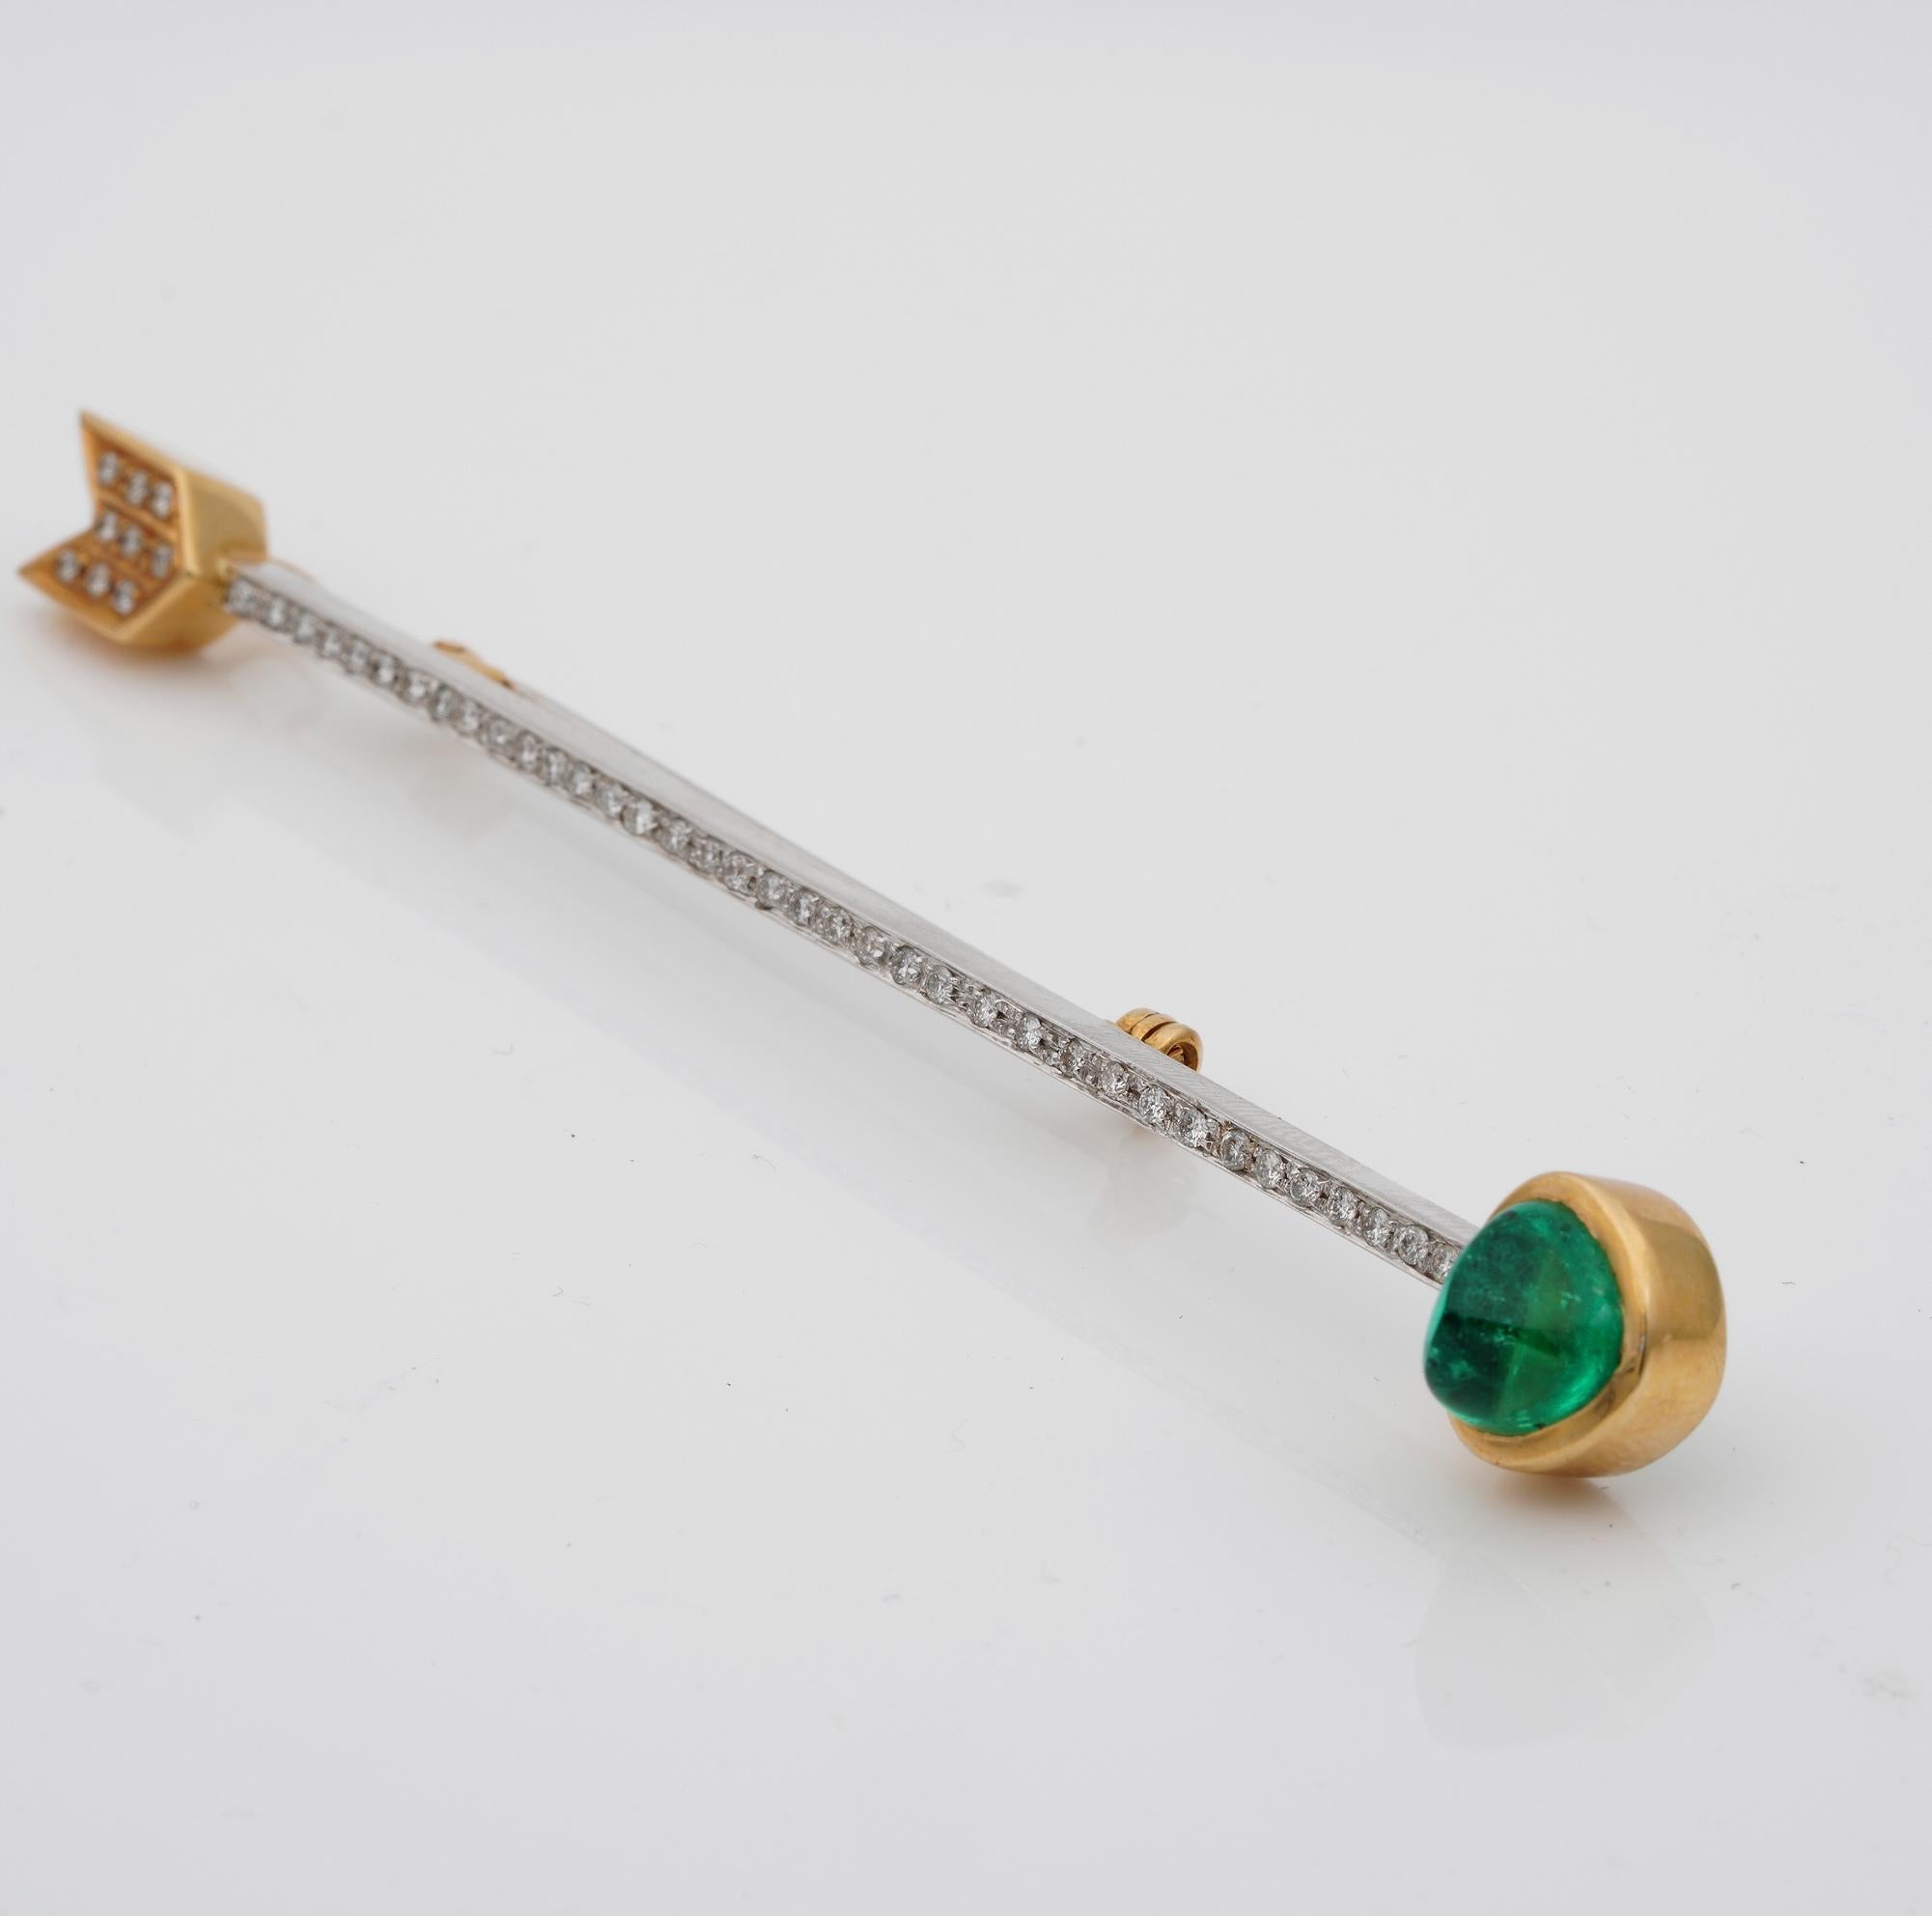 Out of this world, top quality Art Deco Emerald and diamond brooch which can be worn either as brooch or as pendant as well
Exquisitely hand crafted of solid 18 KT not marked
Set with a sheer quality sugar loaf natural Colombian Emerald of